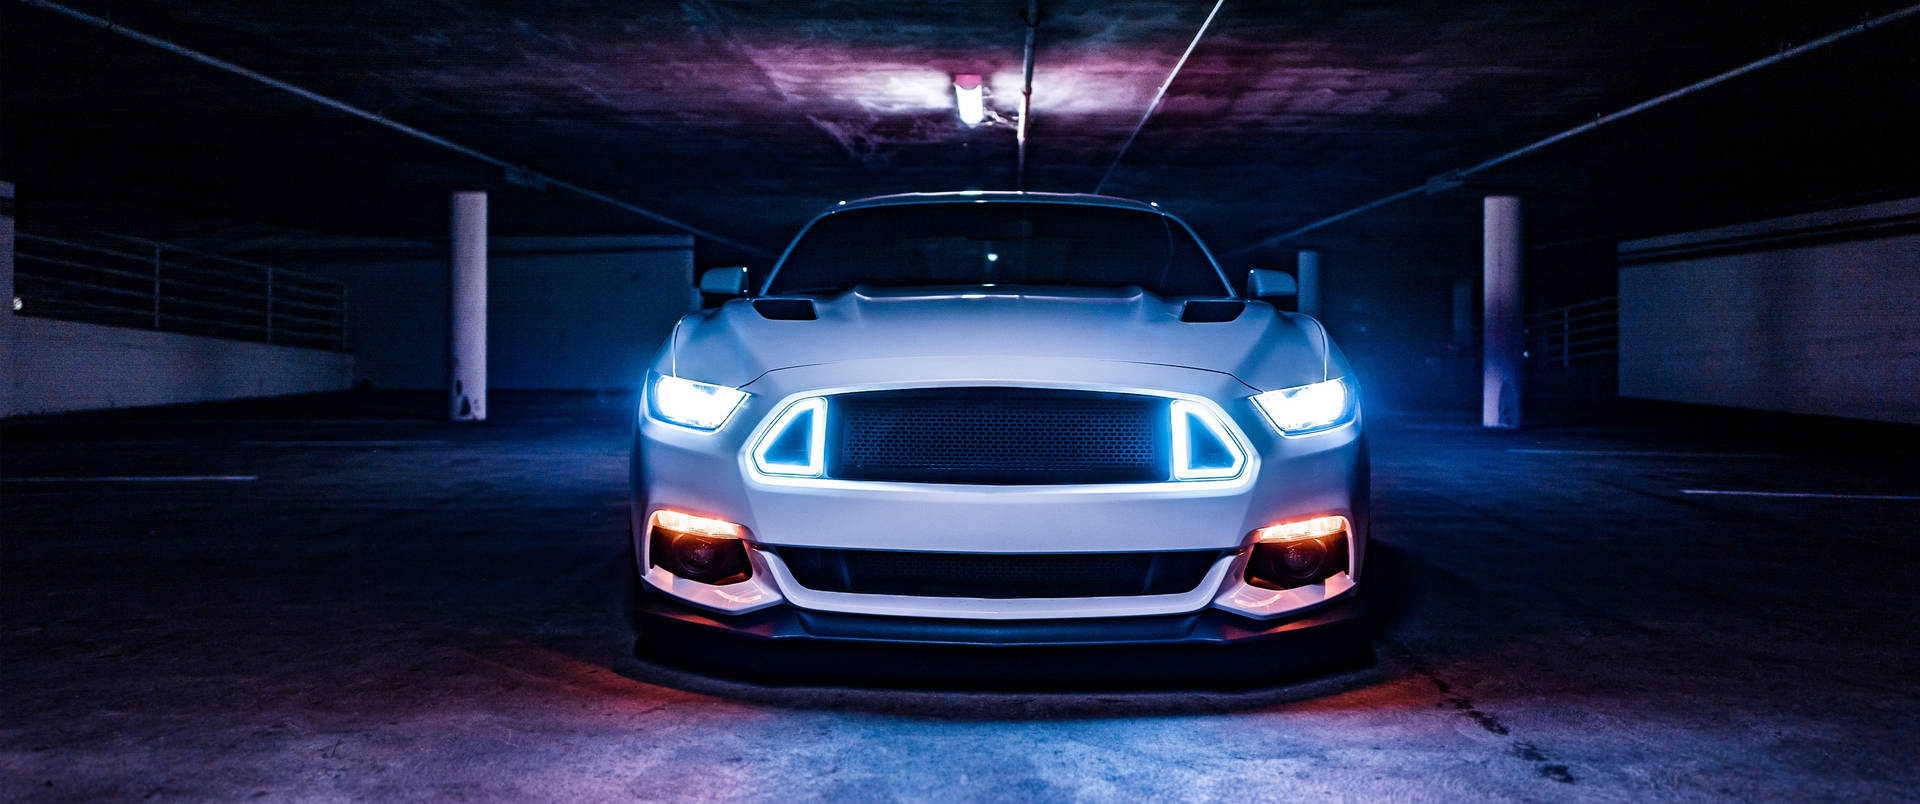 3440x1440 Car Ford Mustang Background